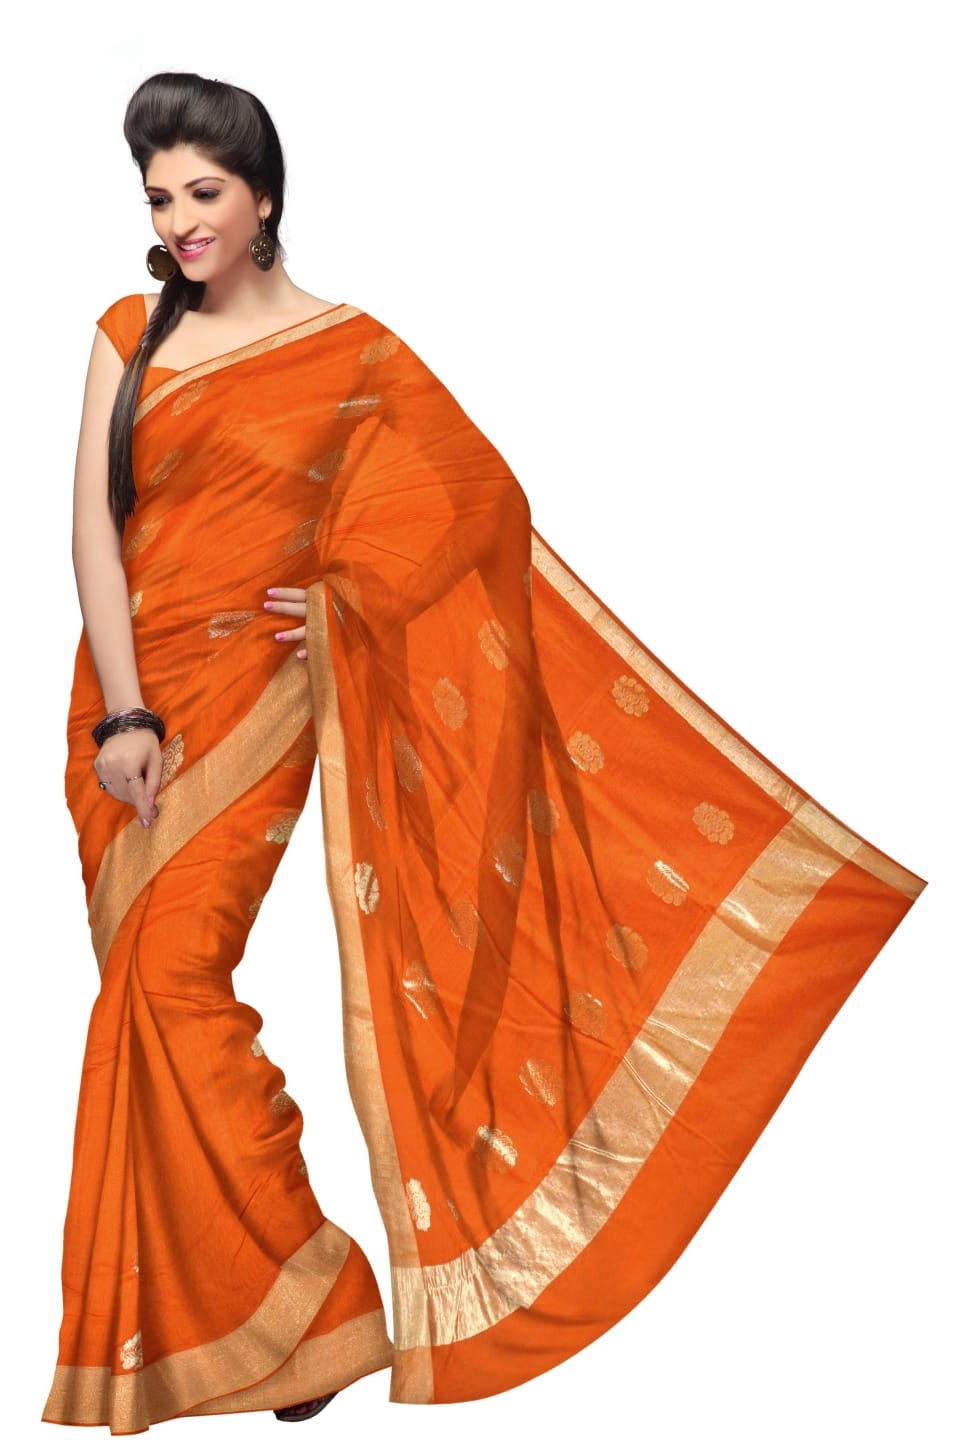 Dress, Fashion, Saree, Silk, Woman, one young woman only, young adult preview